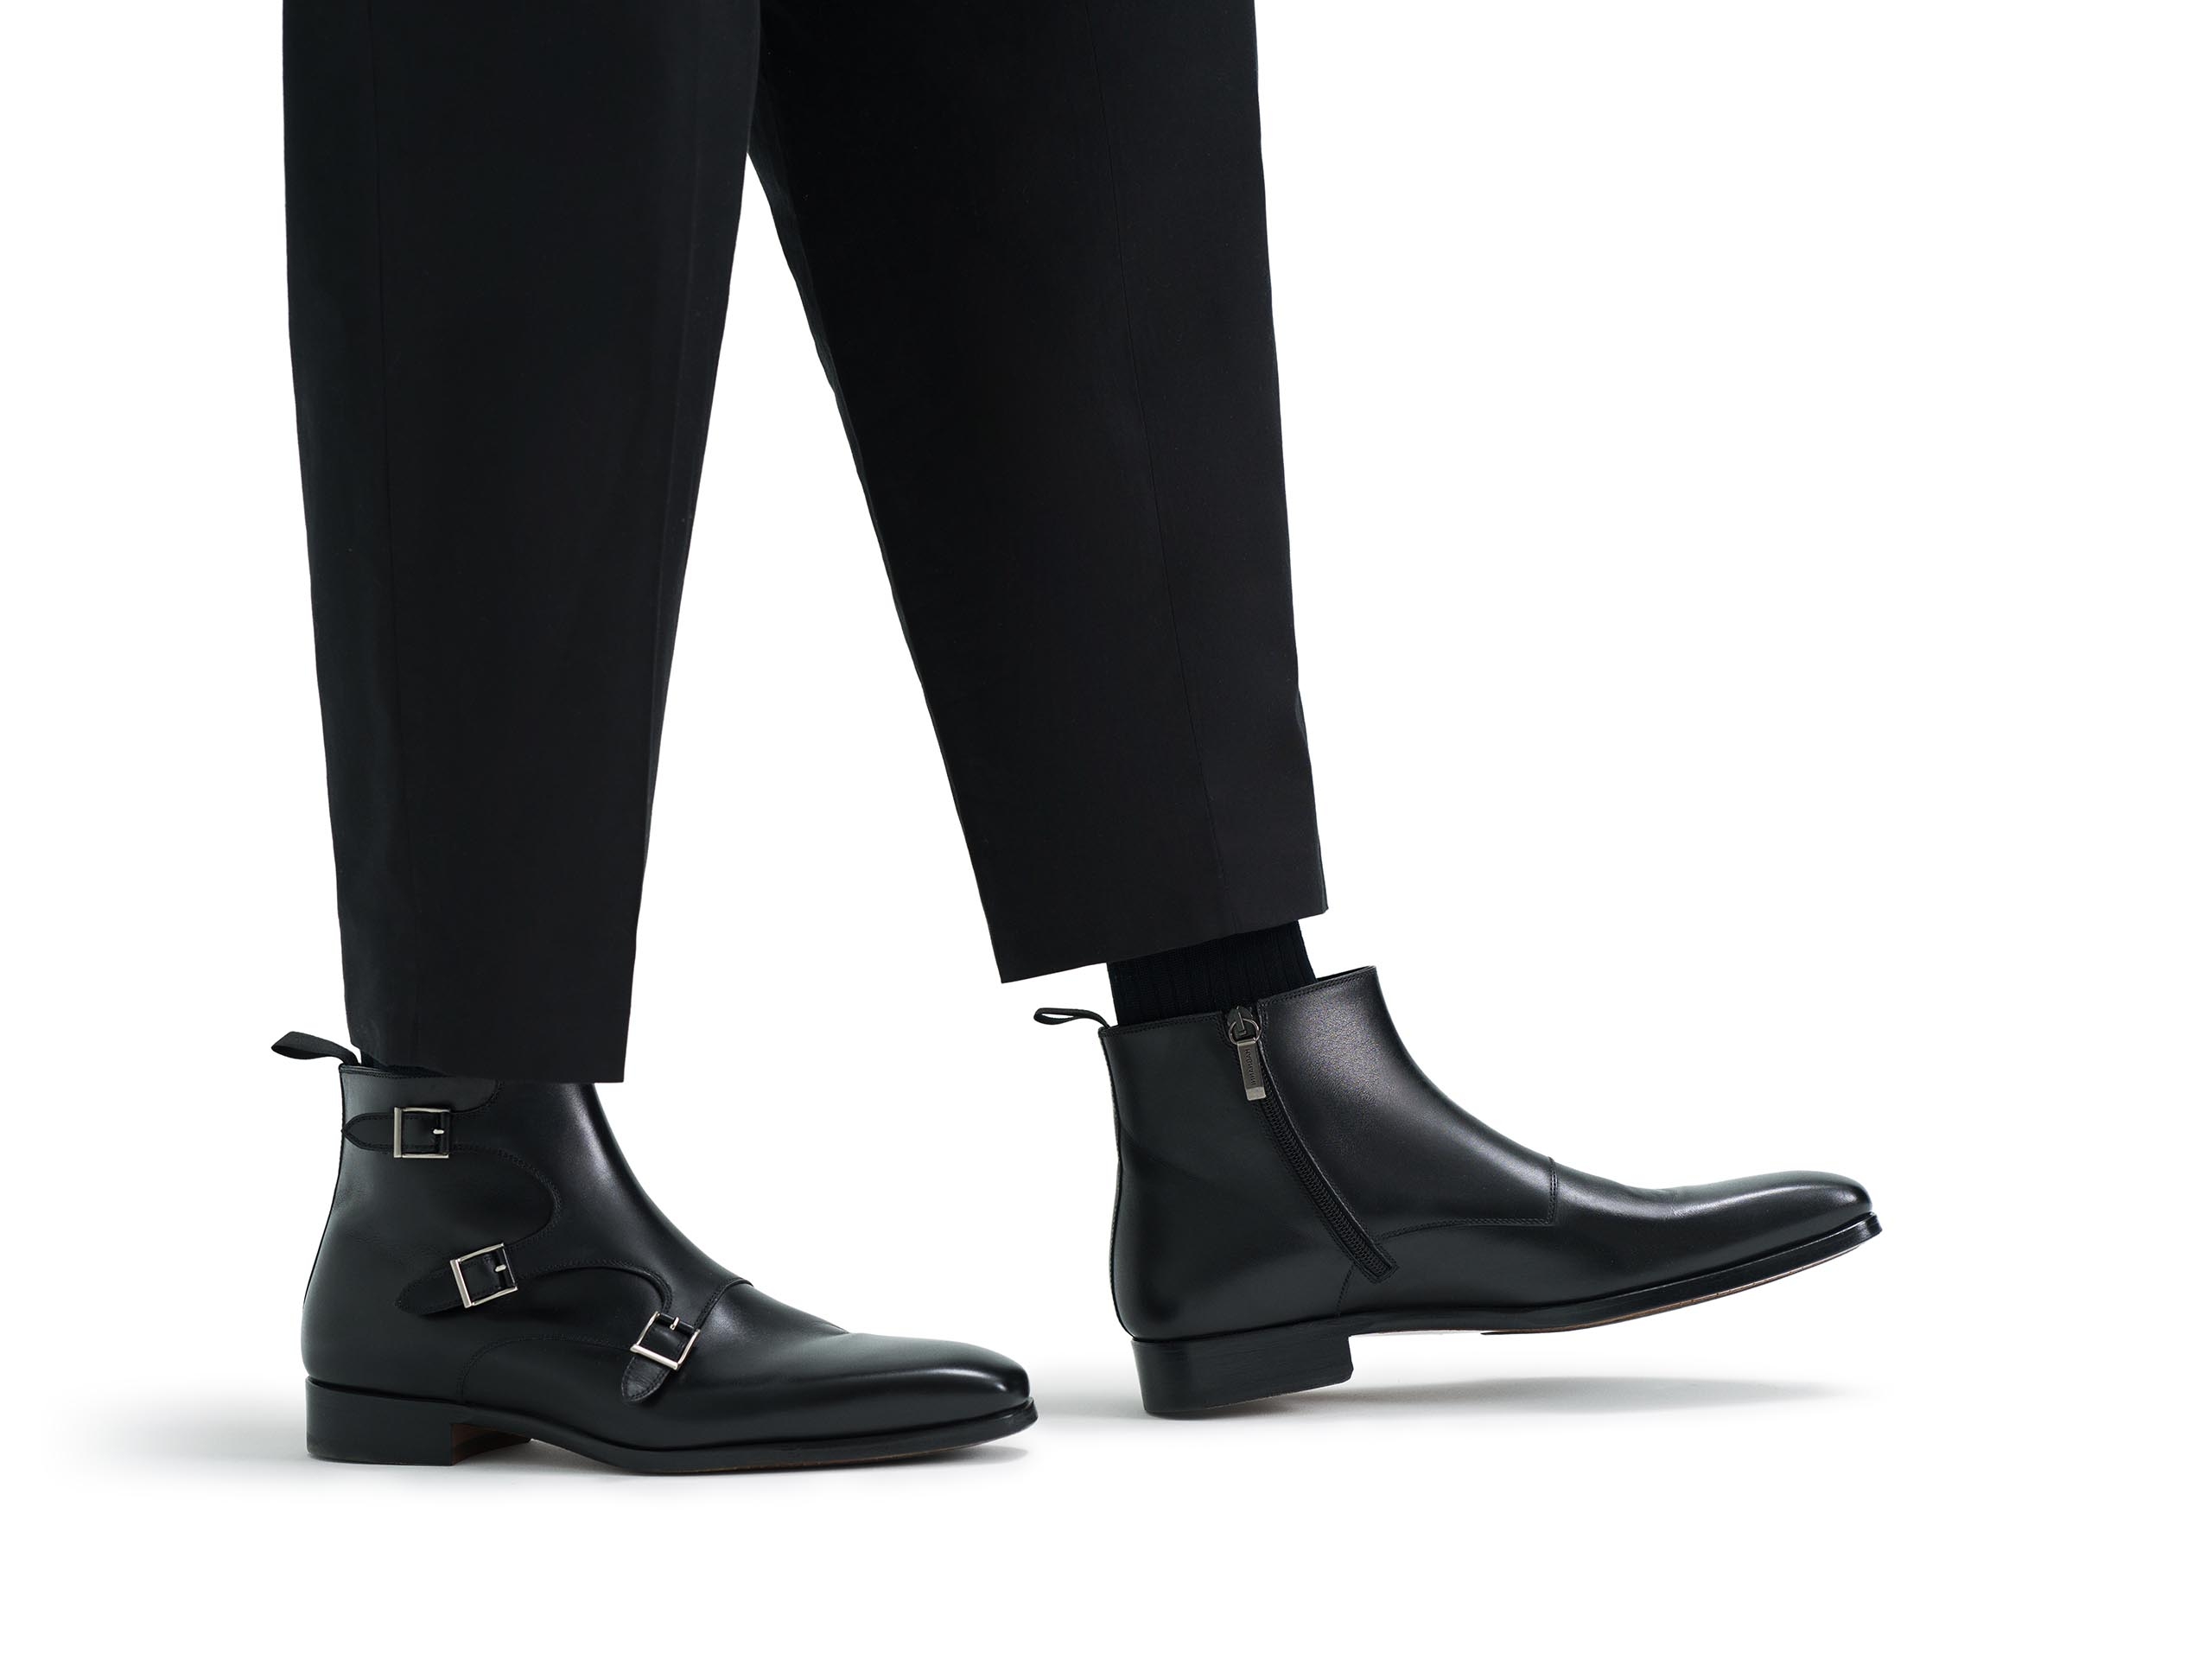 The Jagger Black is pair well with dark dress pants